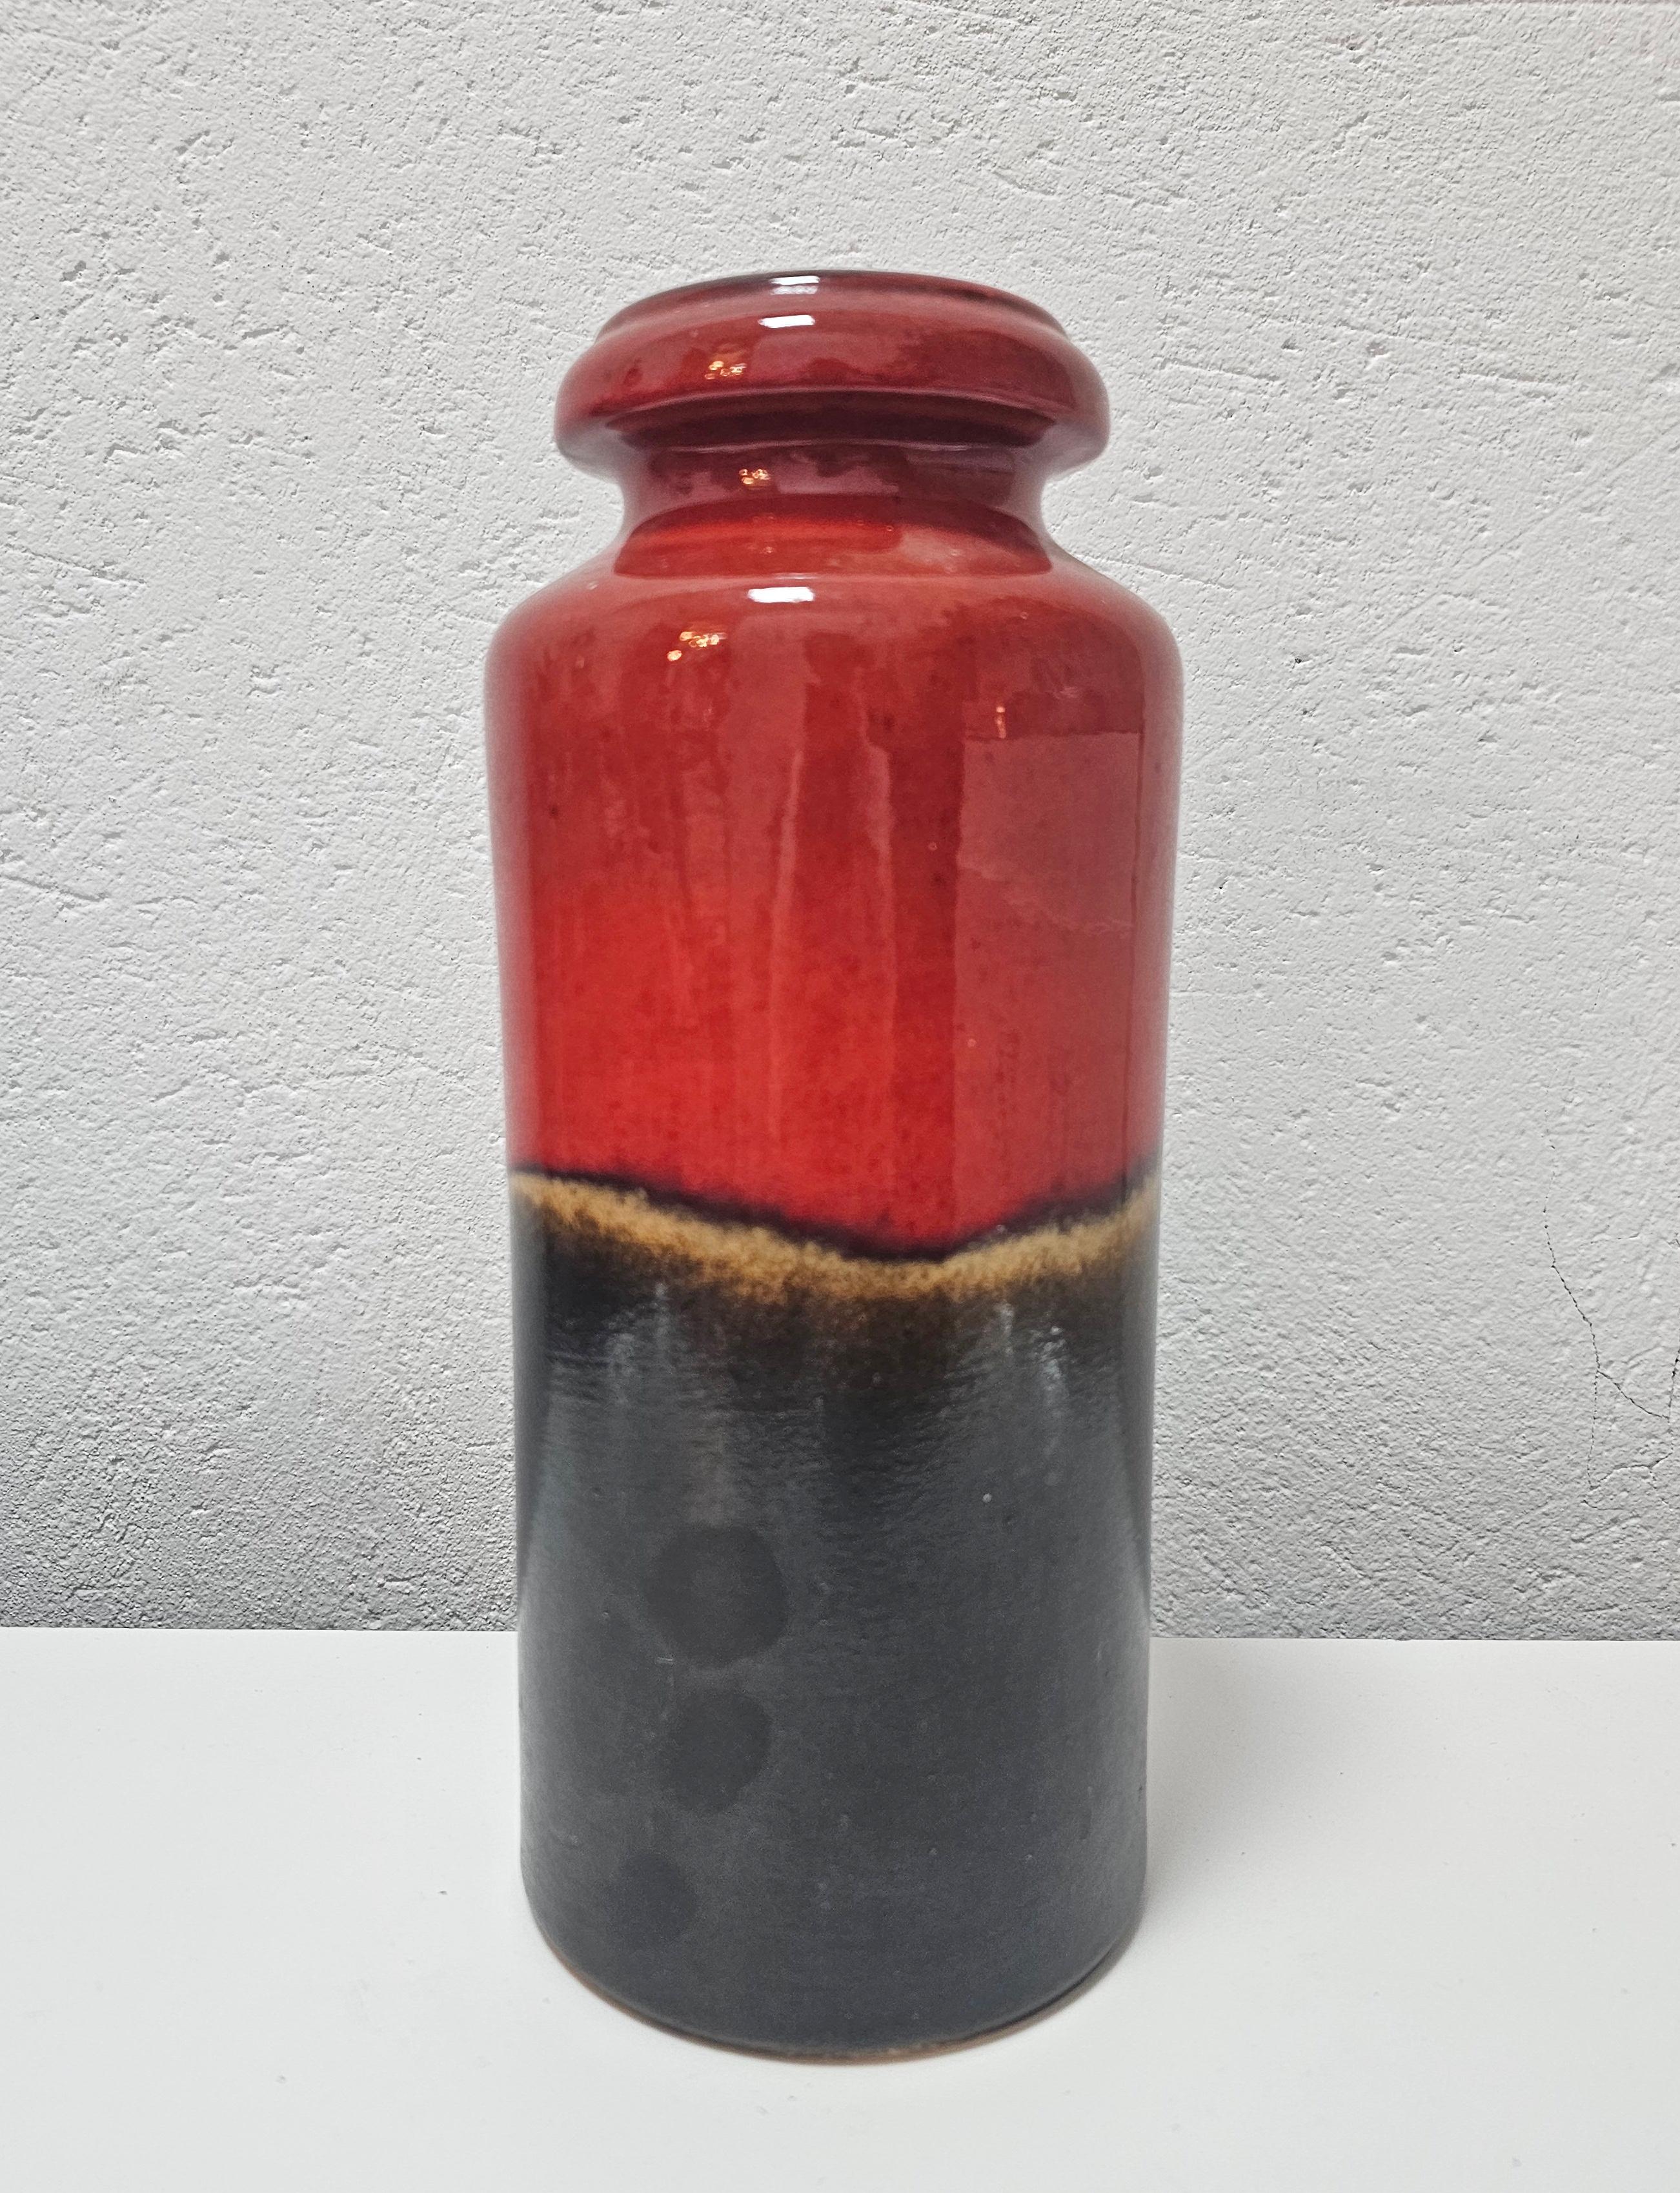 In this listing you will find a Rare Vintage Ceramic Vase in Red and Brown glaze, manufactured by Scheurich, model 517-30. The iconic West German Pottery comes in perfect vintage condition, with no damages, nor scratches. The vase is signed and on